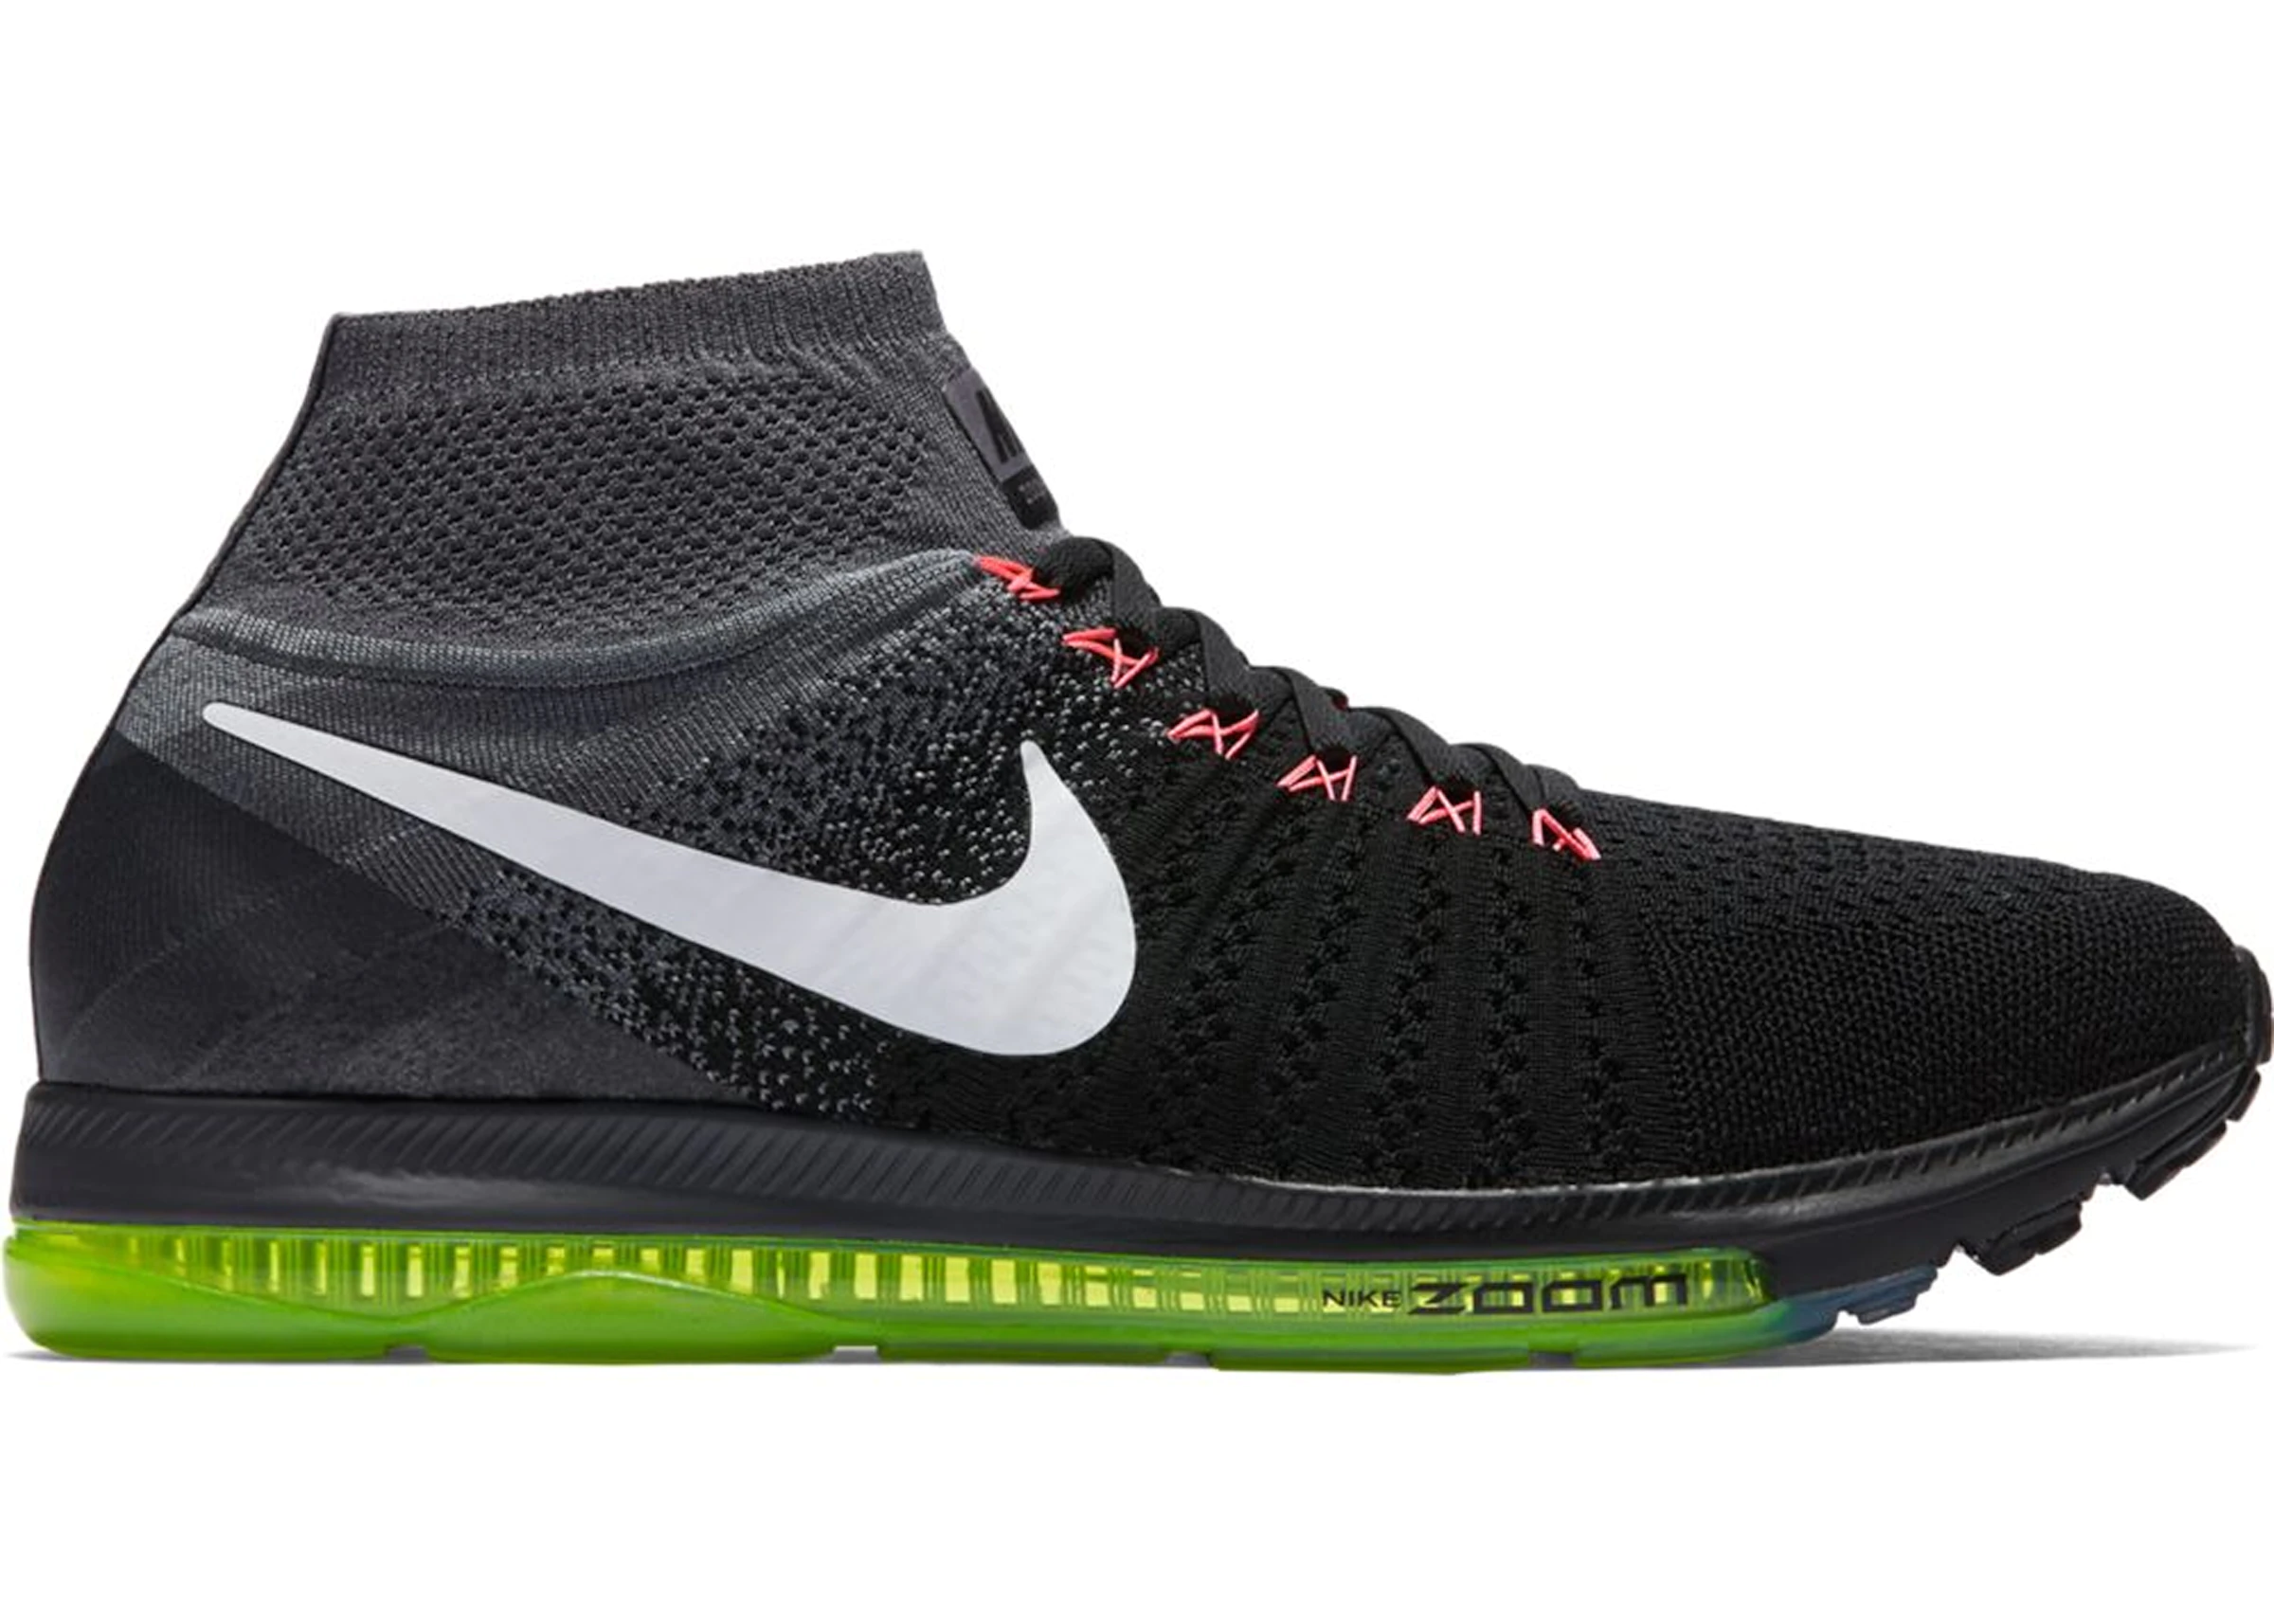 Nike Zoom All Out Flyknit Black White Volt - 845361-002 - ES